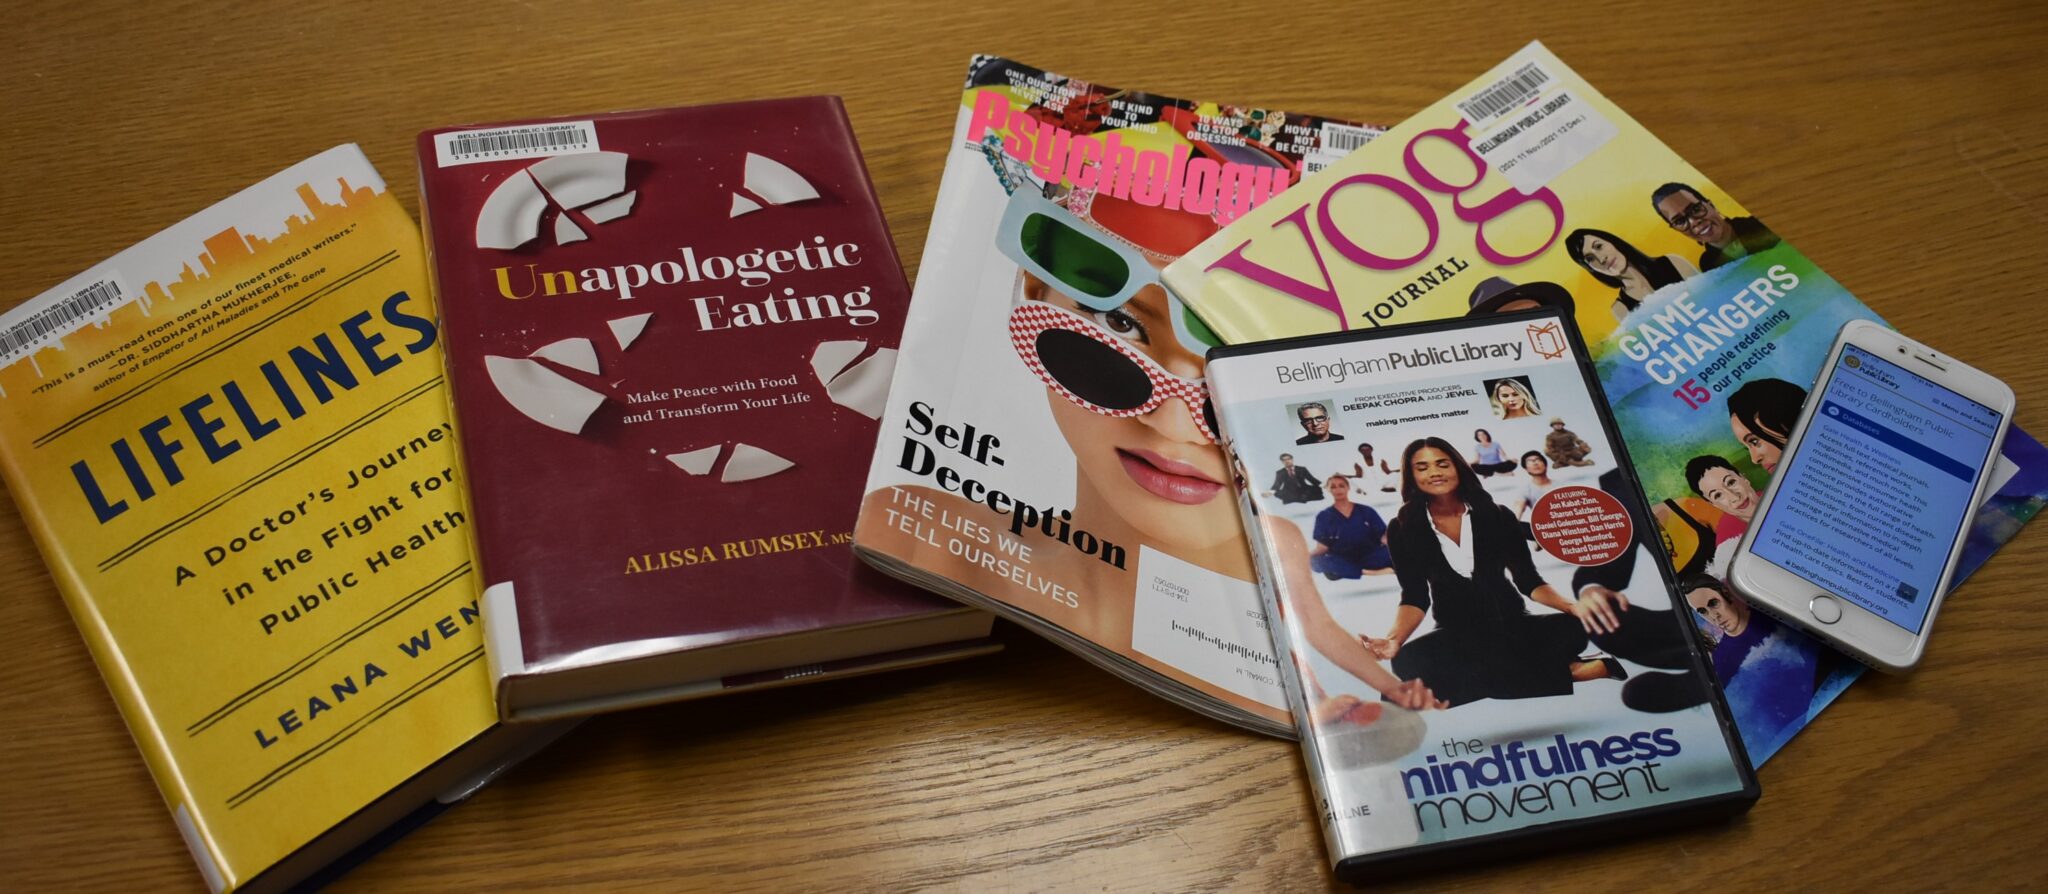 Health and Wellness books, magazines, dvds